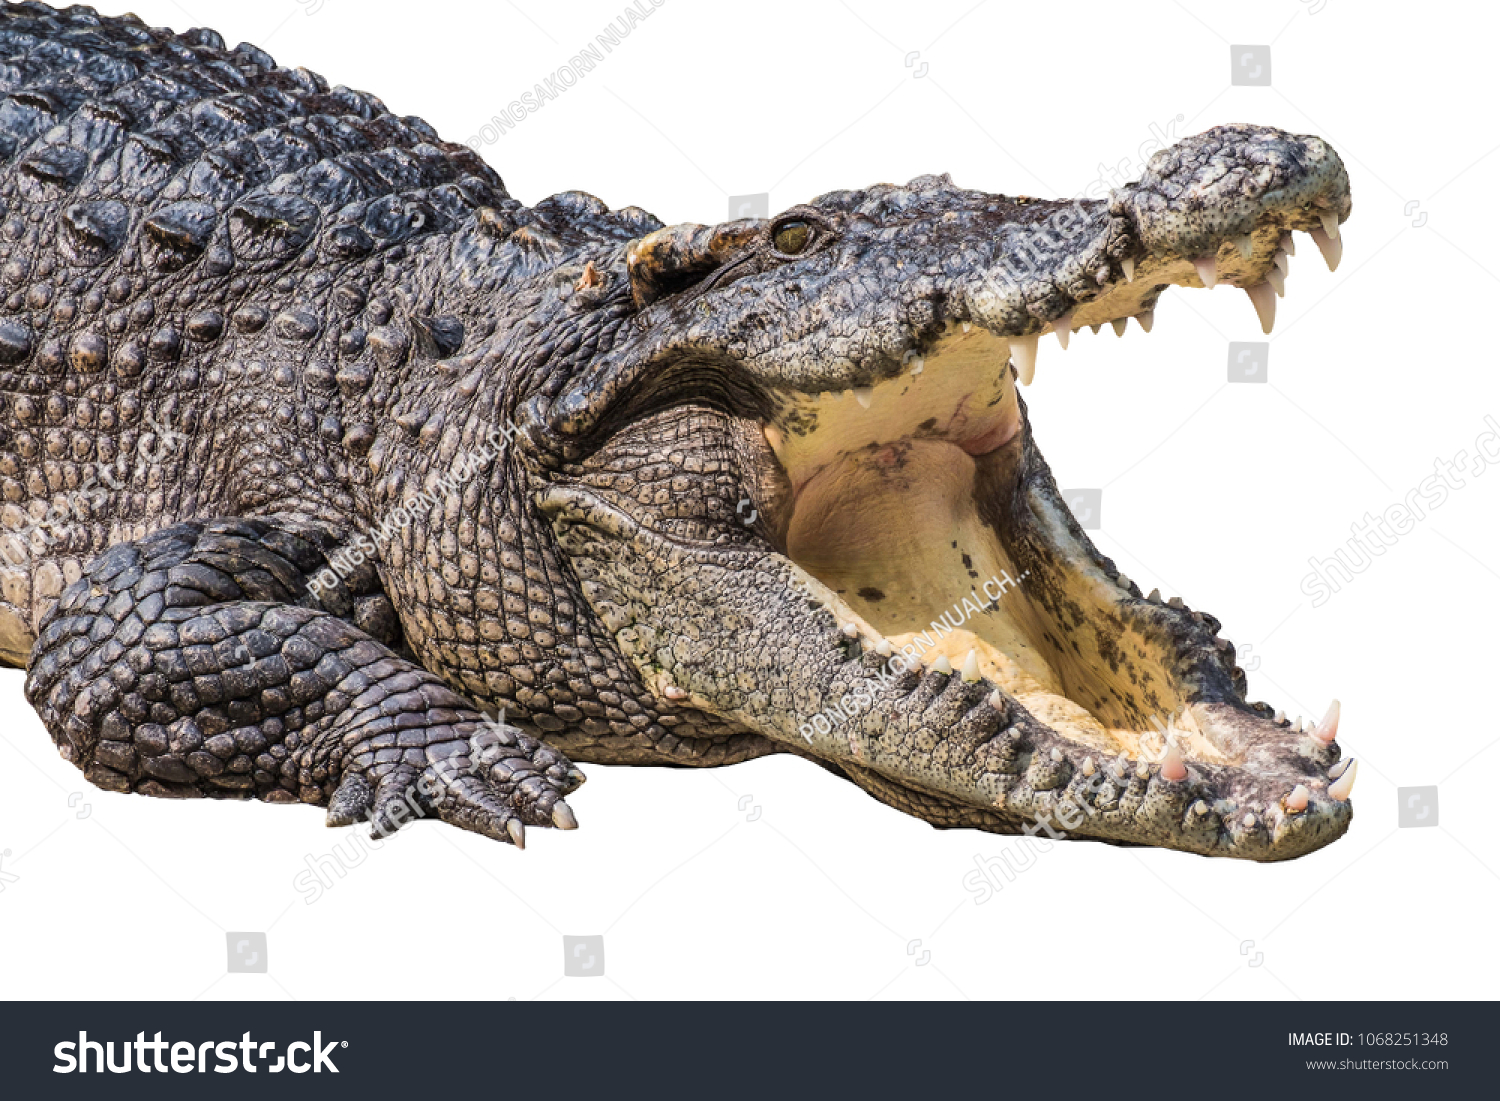 The crocodile is opening its mouth at the crocodile farm in Thailand Zoo. Amphibian fierce eyes In water White backdrop #1068251348